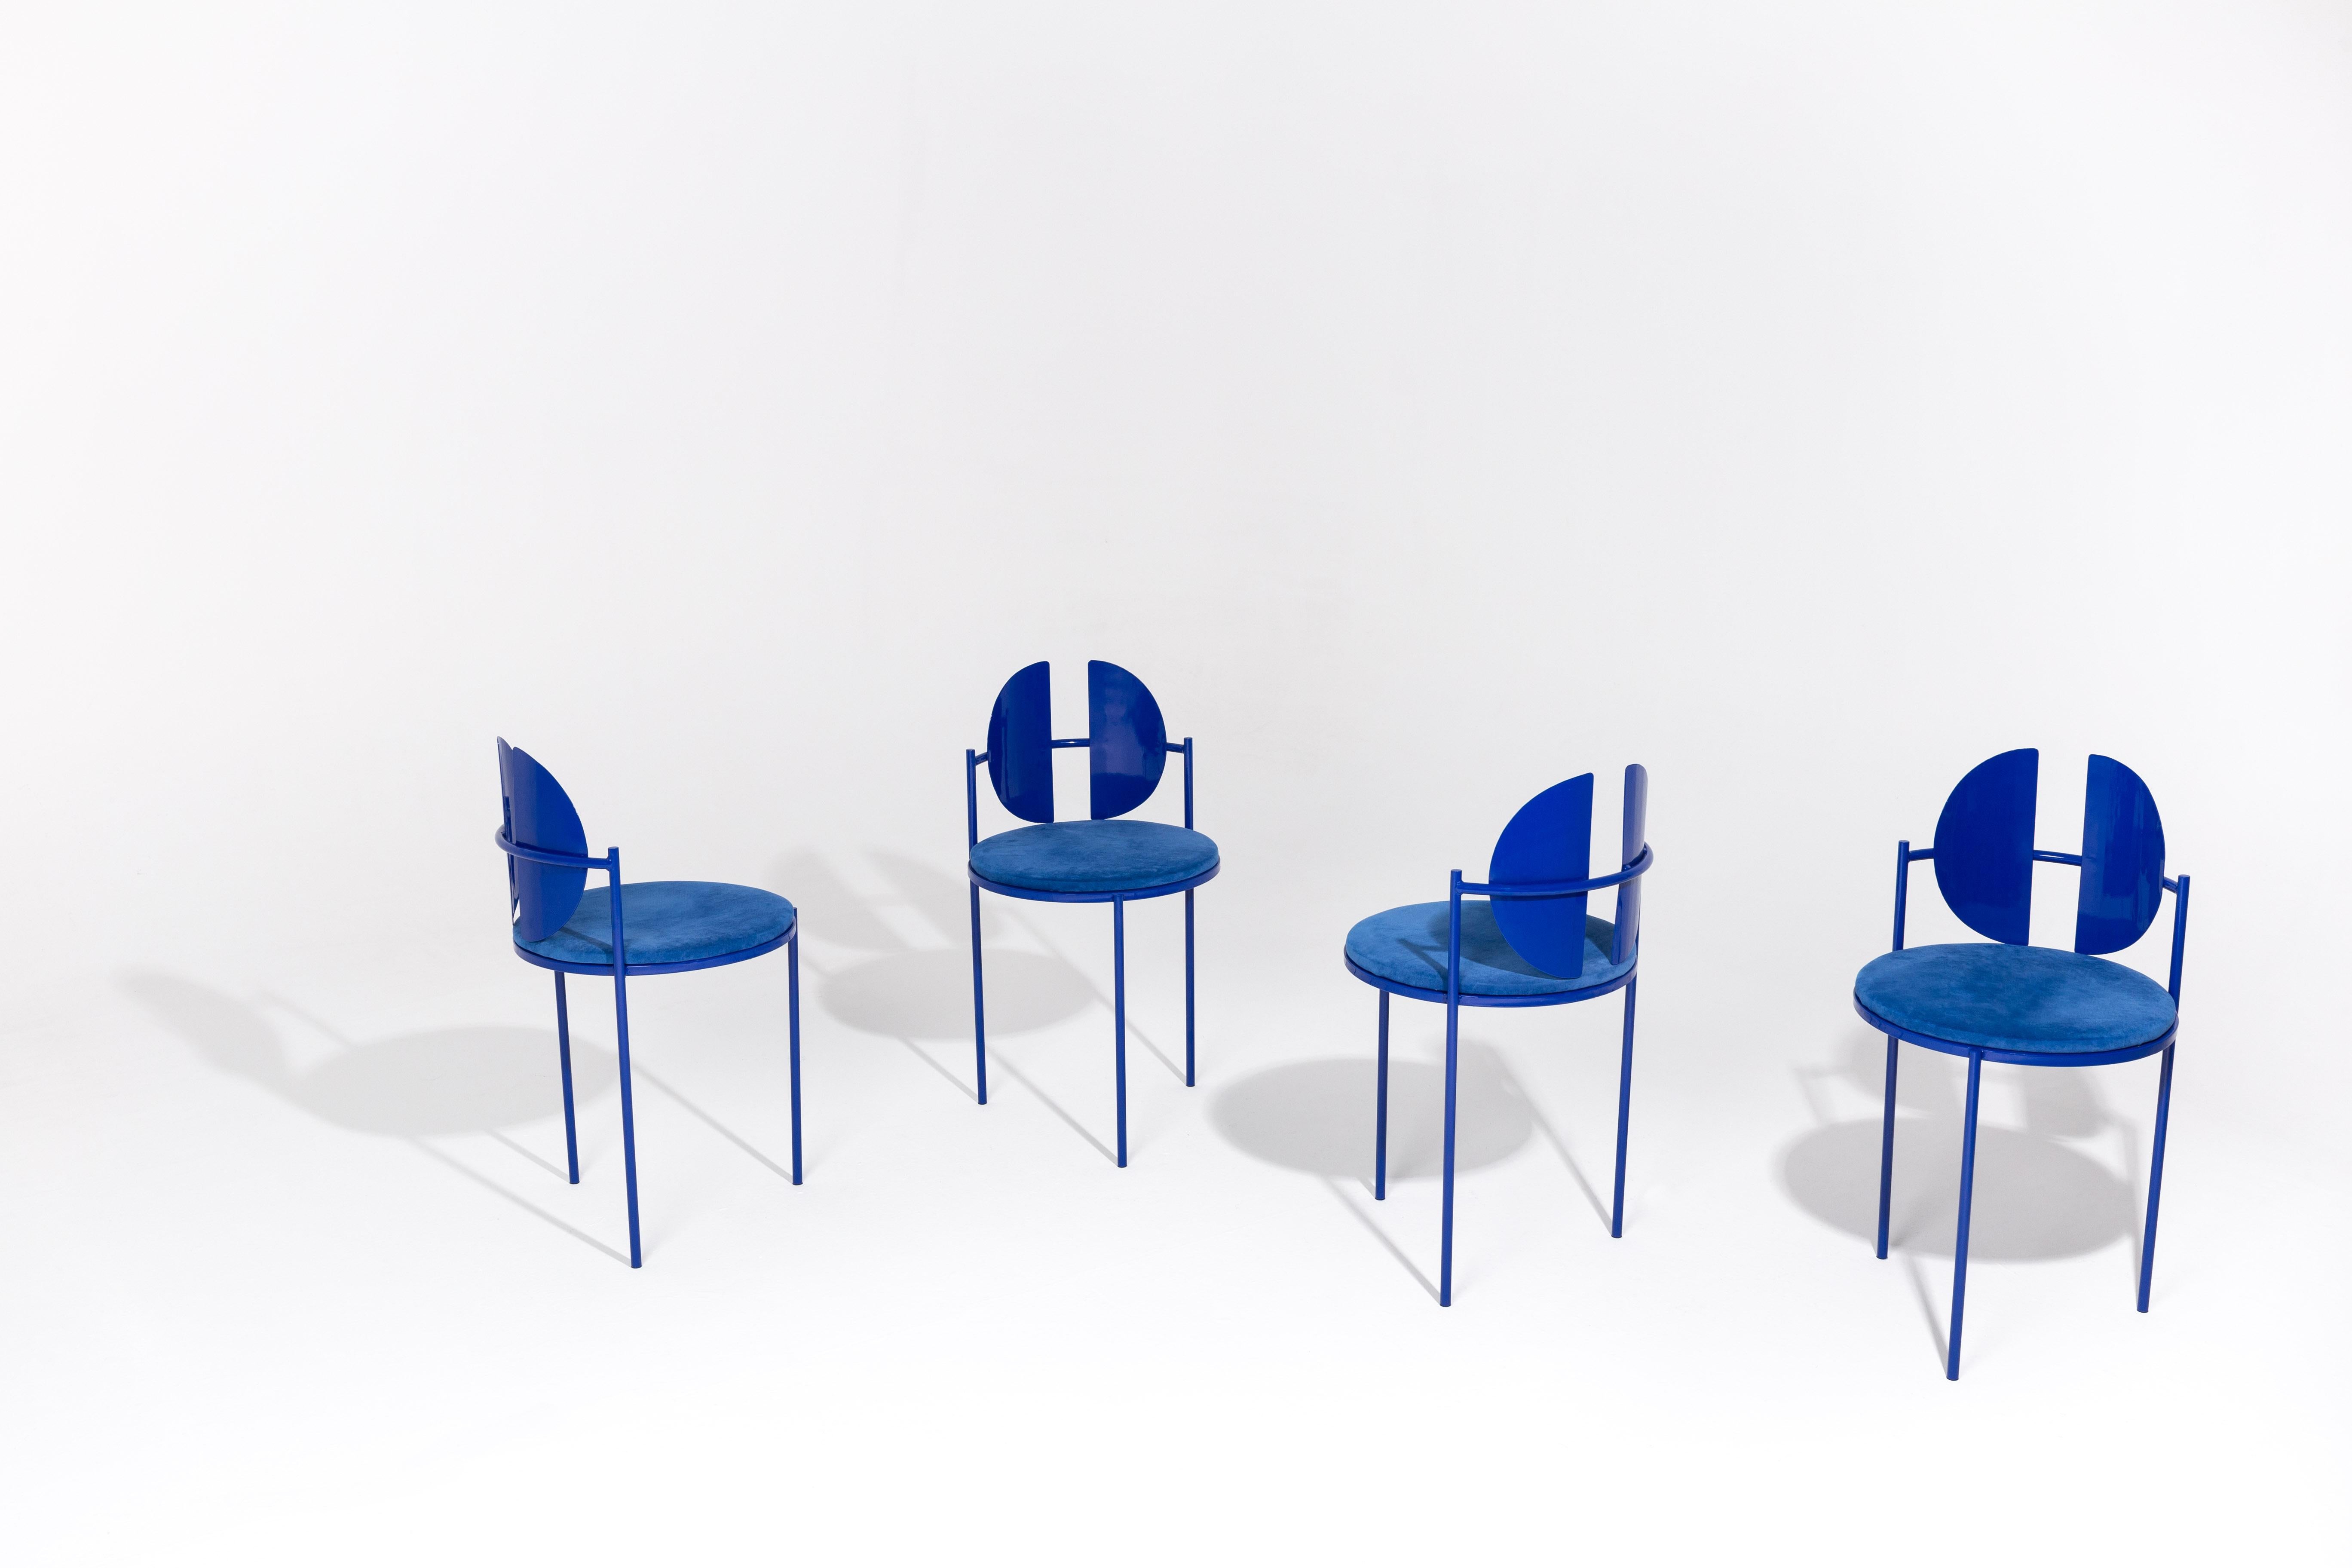 Qoticher chair
Measures: Cm: Ø44 x 48 seat 80 back cm 
Inches: Ø17 x 19 seat 32 back in
Any RAL metallic structure with synthetic velvet seat.
Can be made to order in other colors/dimensions upon request

Ángel Mombiedro
Mombiedro's work is